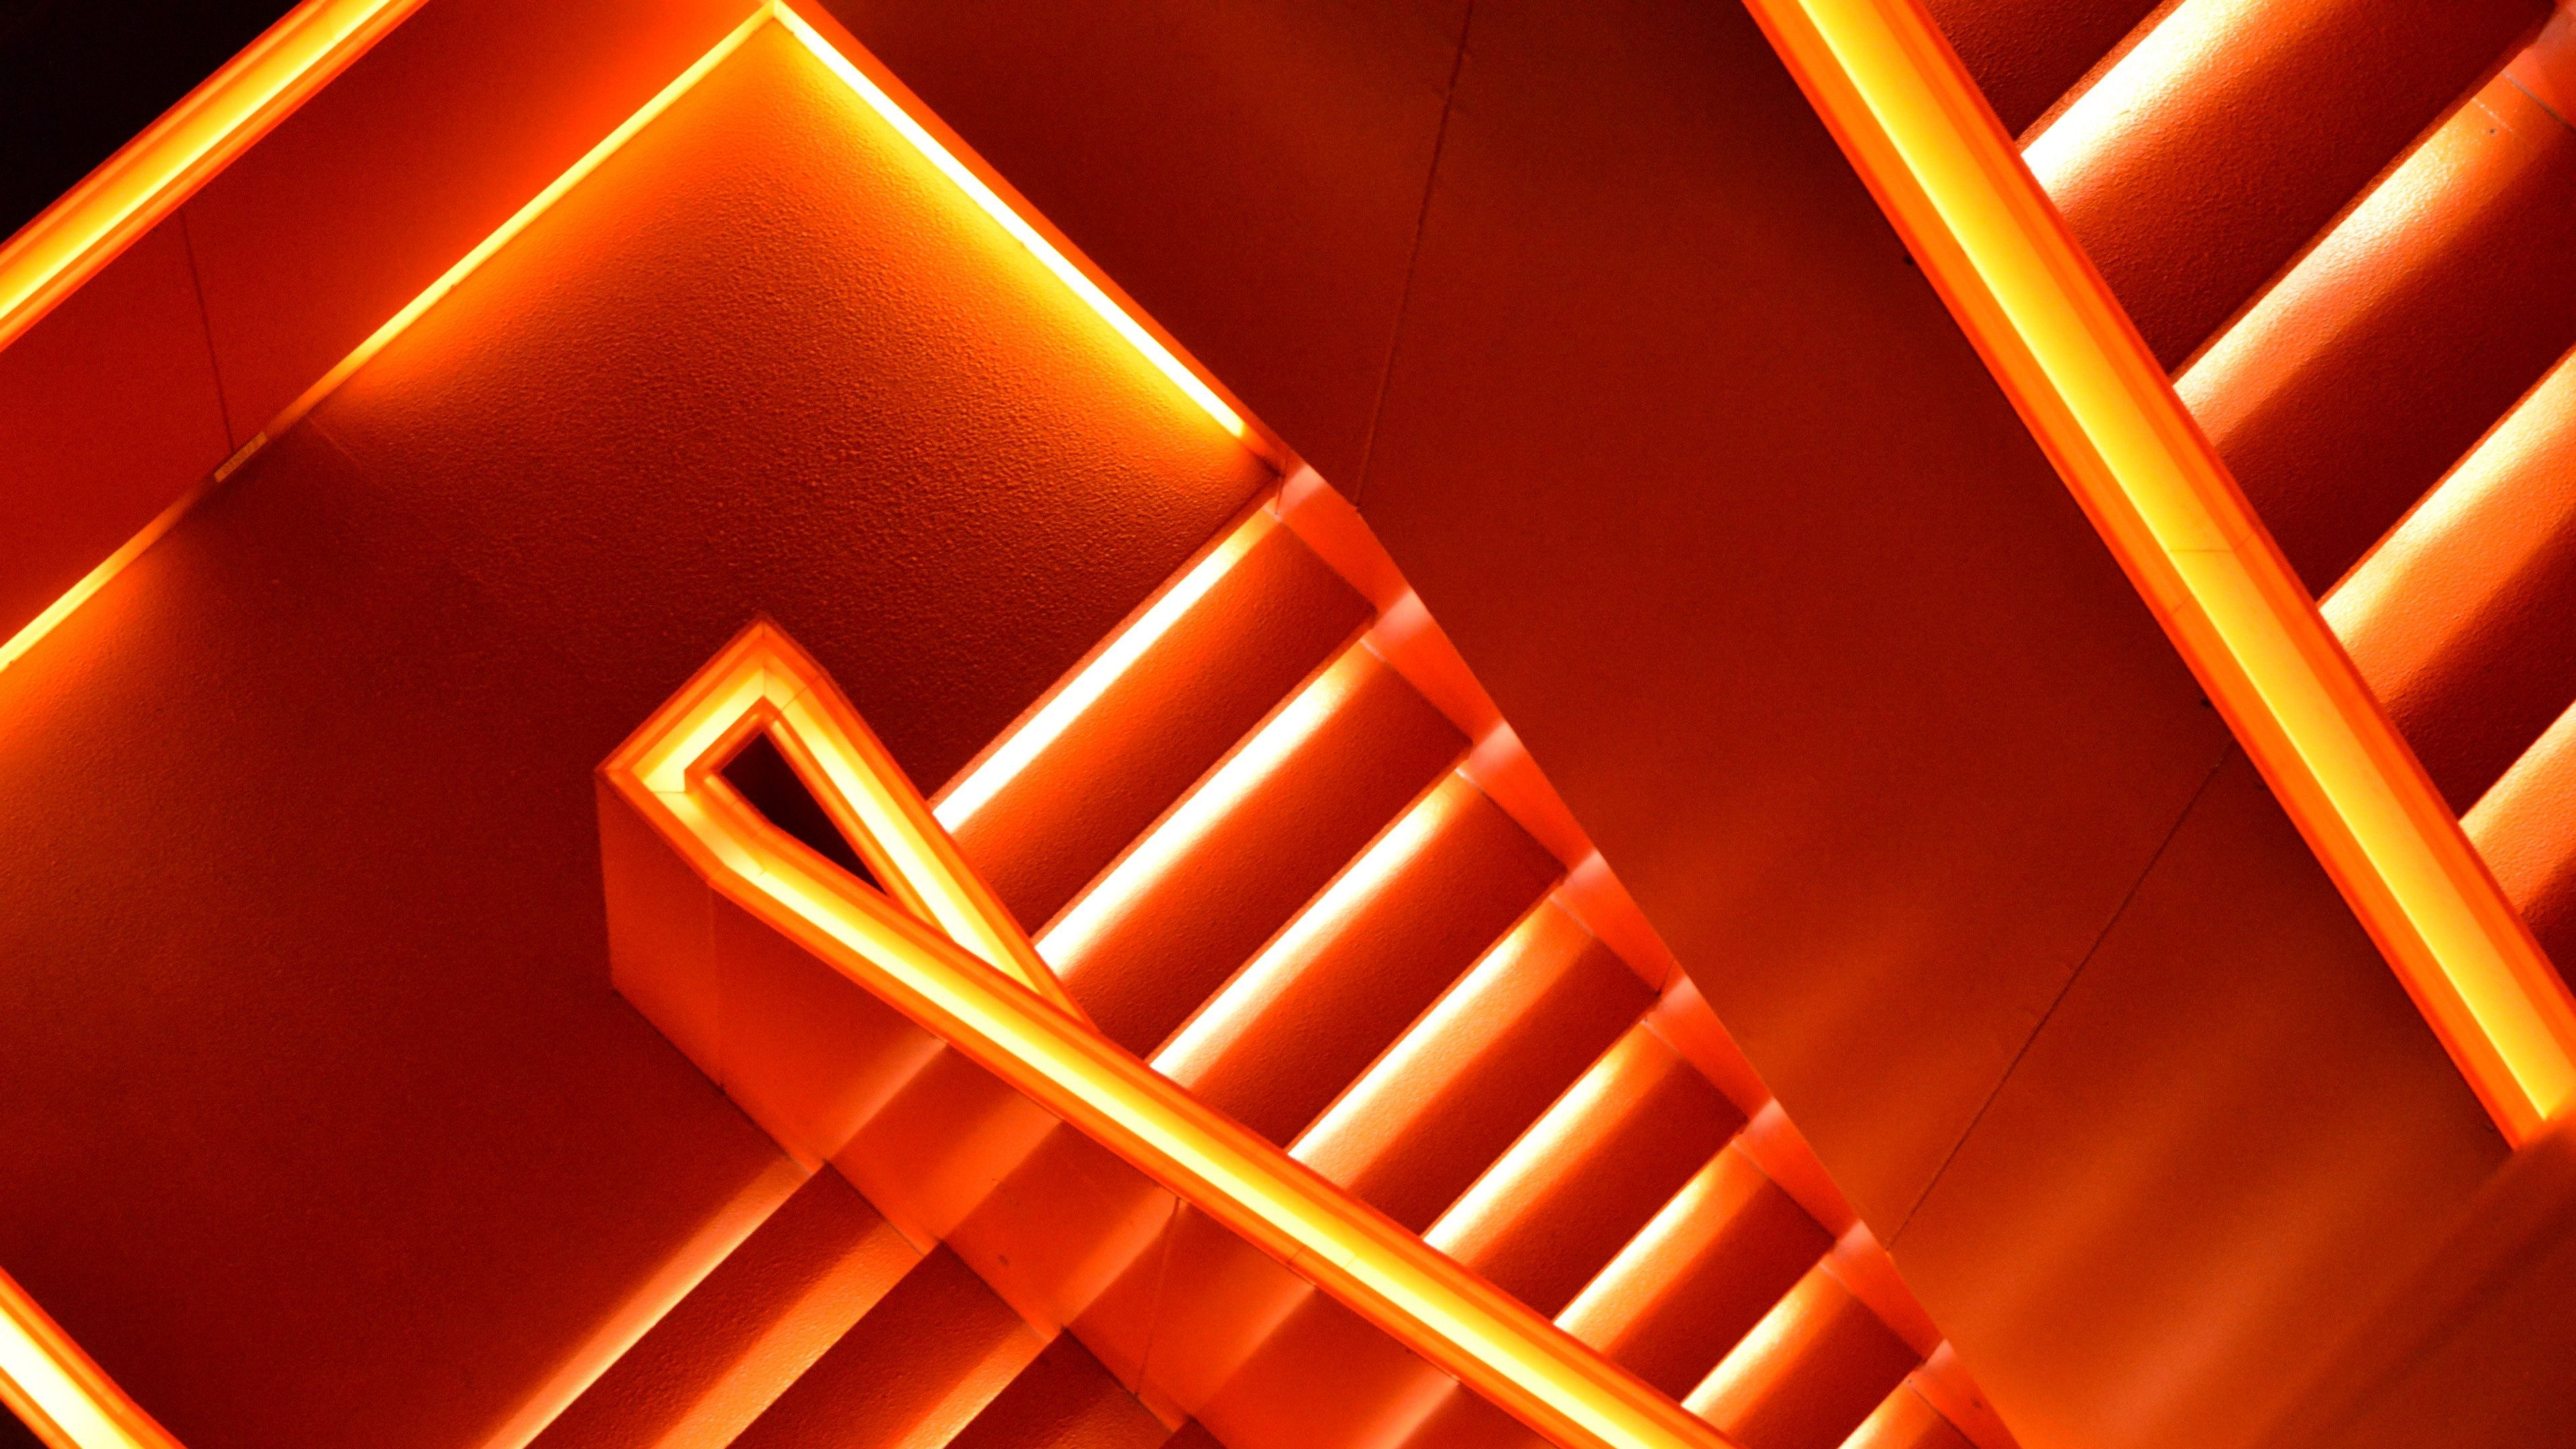 A photo of a staircase with orange lights. - Neon orange